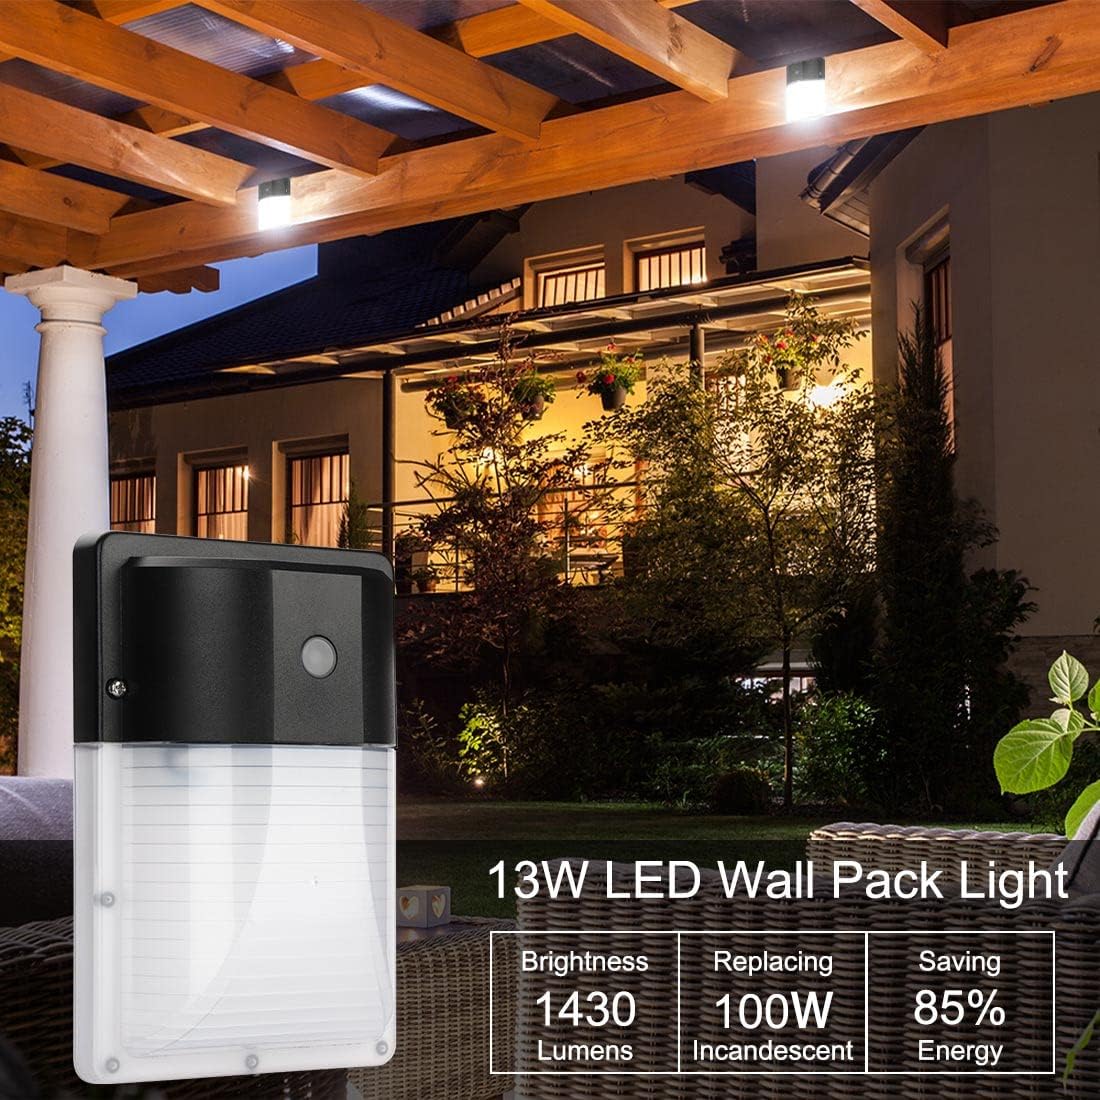 kadision LED Wall Pack Light with Dusk to Dawn Photocell, 13W 1430lm 5000K 100-277V IP65 Waterproof Outdoor Security Lights, ETL Listed, 4-Pack